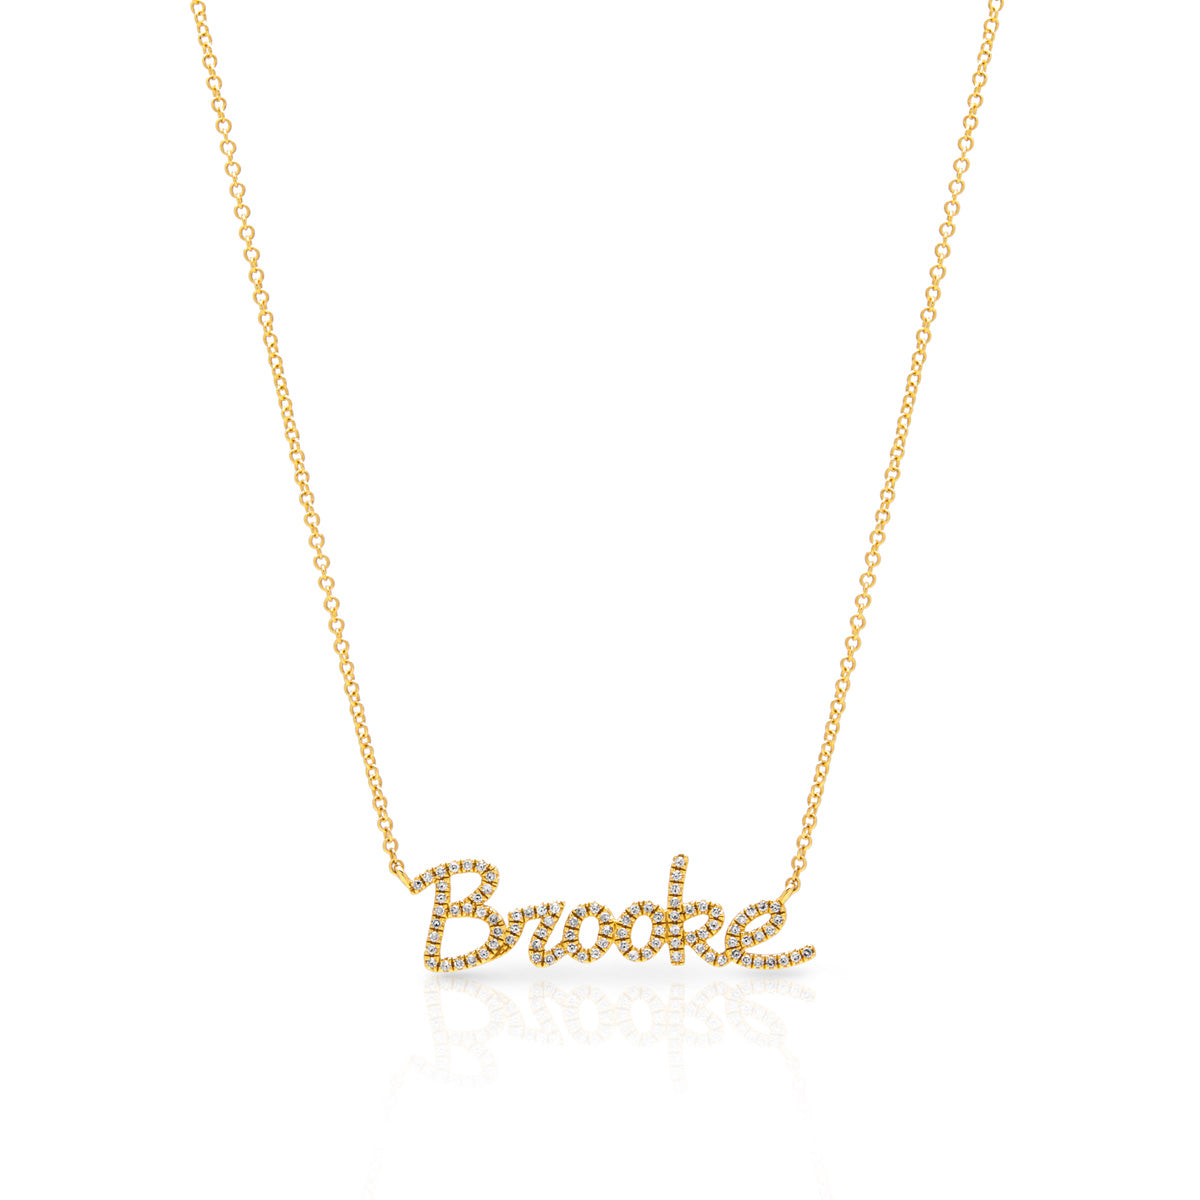 14KT White Gold Diamond Personalized Name Necklace